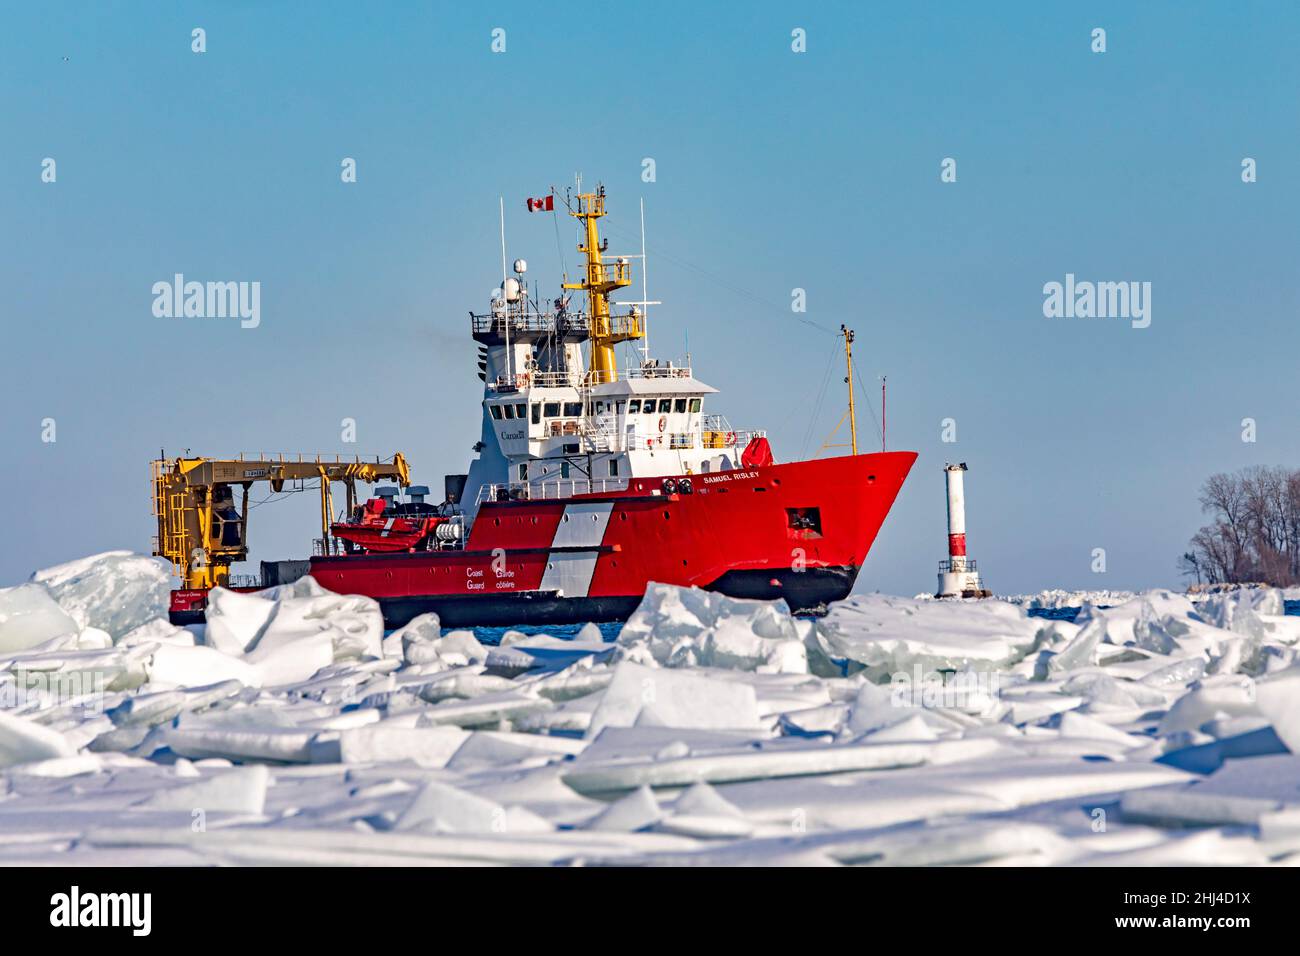 Detroit, Michigan, USA. 26th Jan, 2022. The Canadian Coast Guard vessel Samuel Risley does icebreaking on Lake St. Clair near the Detroit River. Cold weather in the region has created ice jams and caused shipping problems in some locations, Credit: Jim West/Alamy Live News Stock Photo